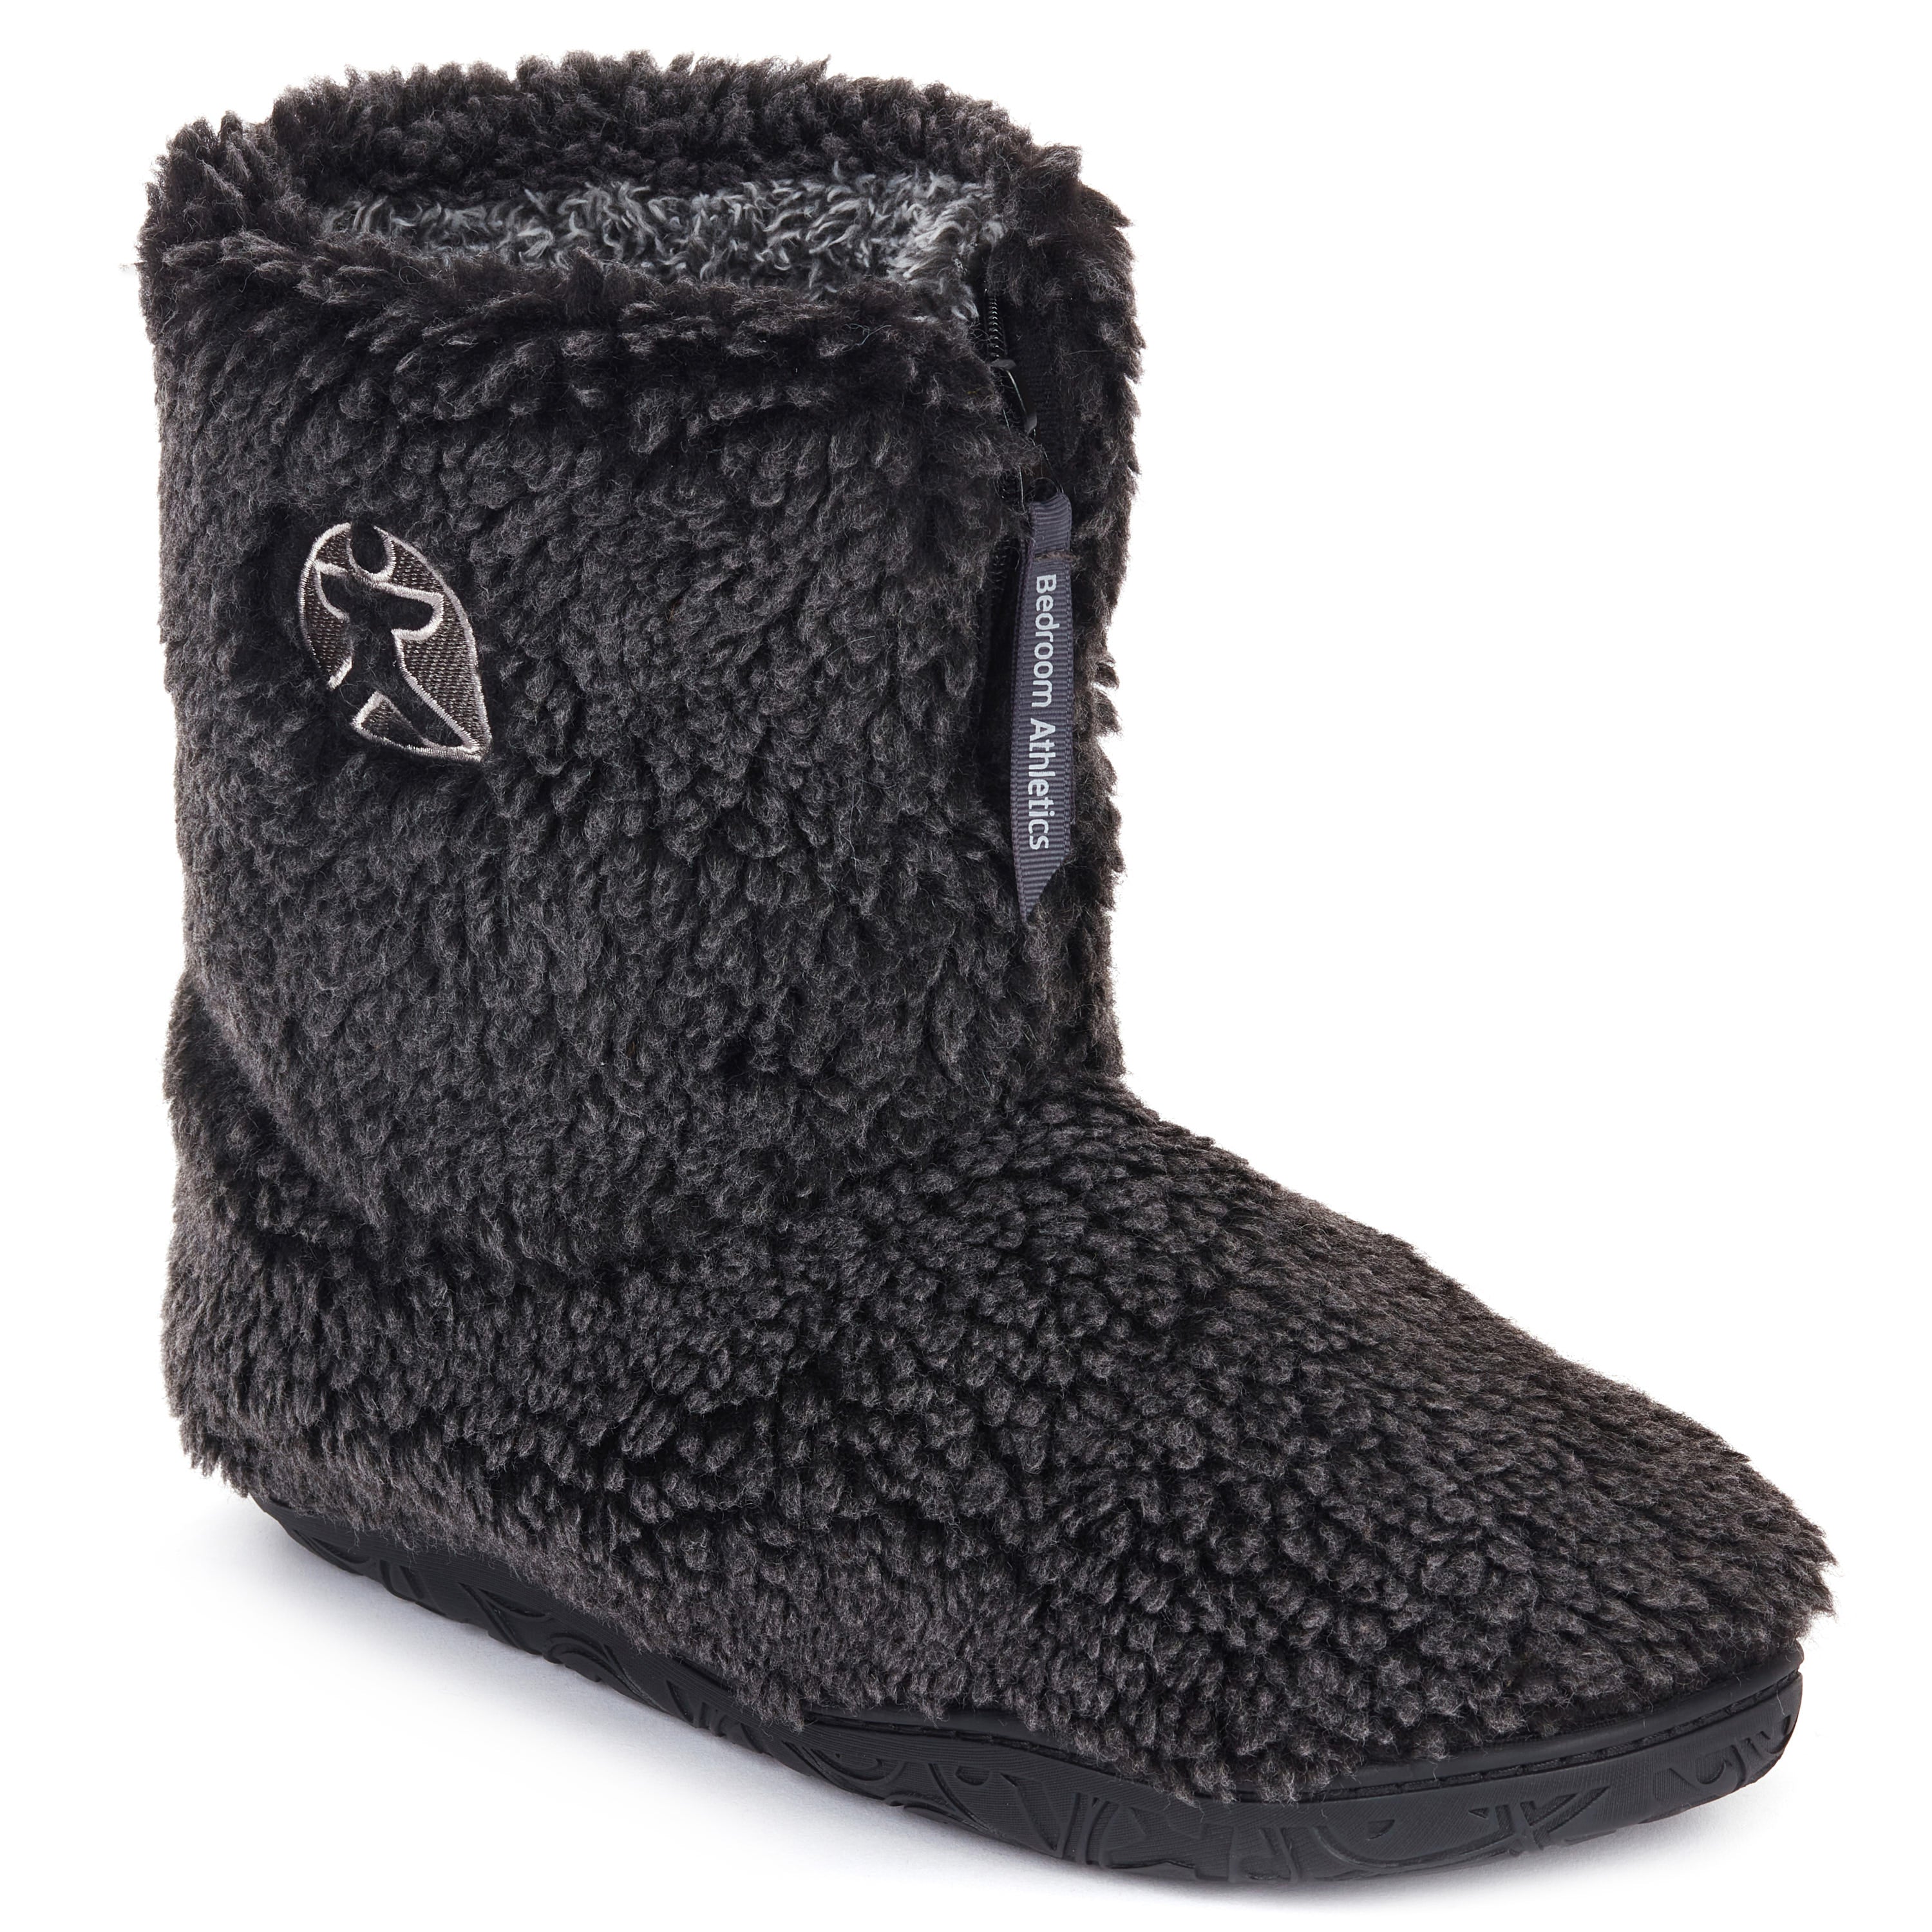 Gosling - Snow Tipped Sherpa Men's Slipper Boot - Washed Black